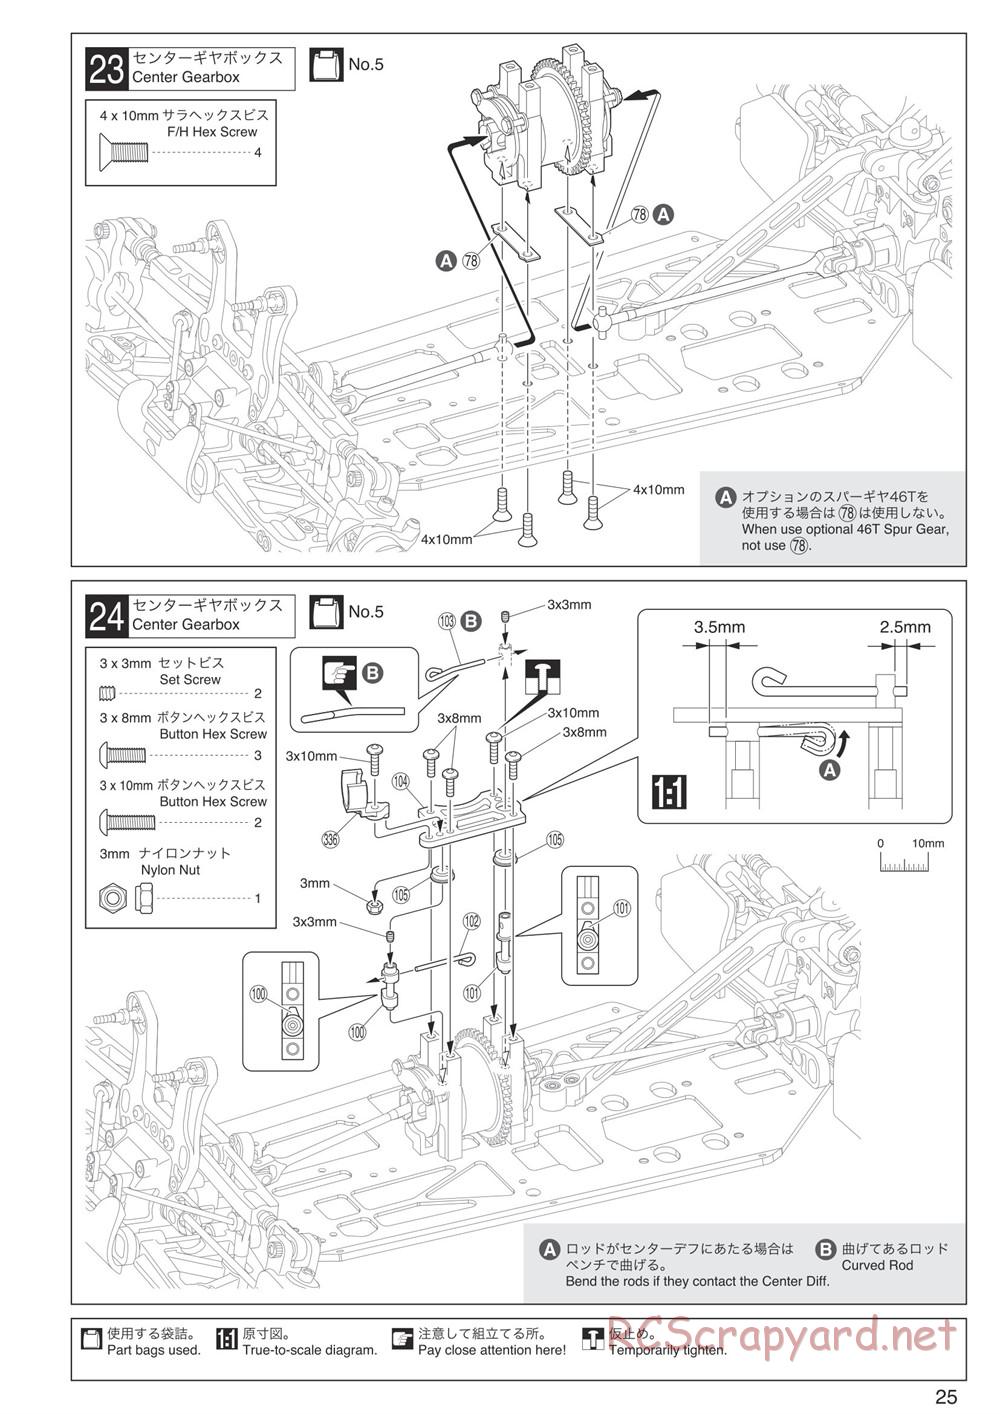 Kyosho - Inferno MP9 TKI4 10th Anniversary Special Edition - Manual - Page 25